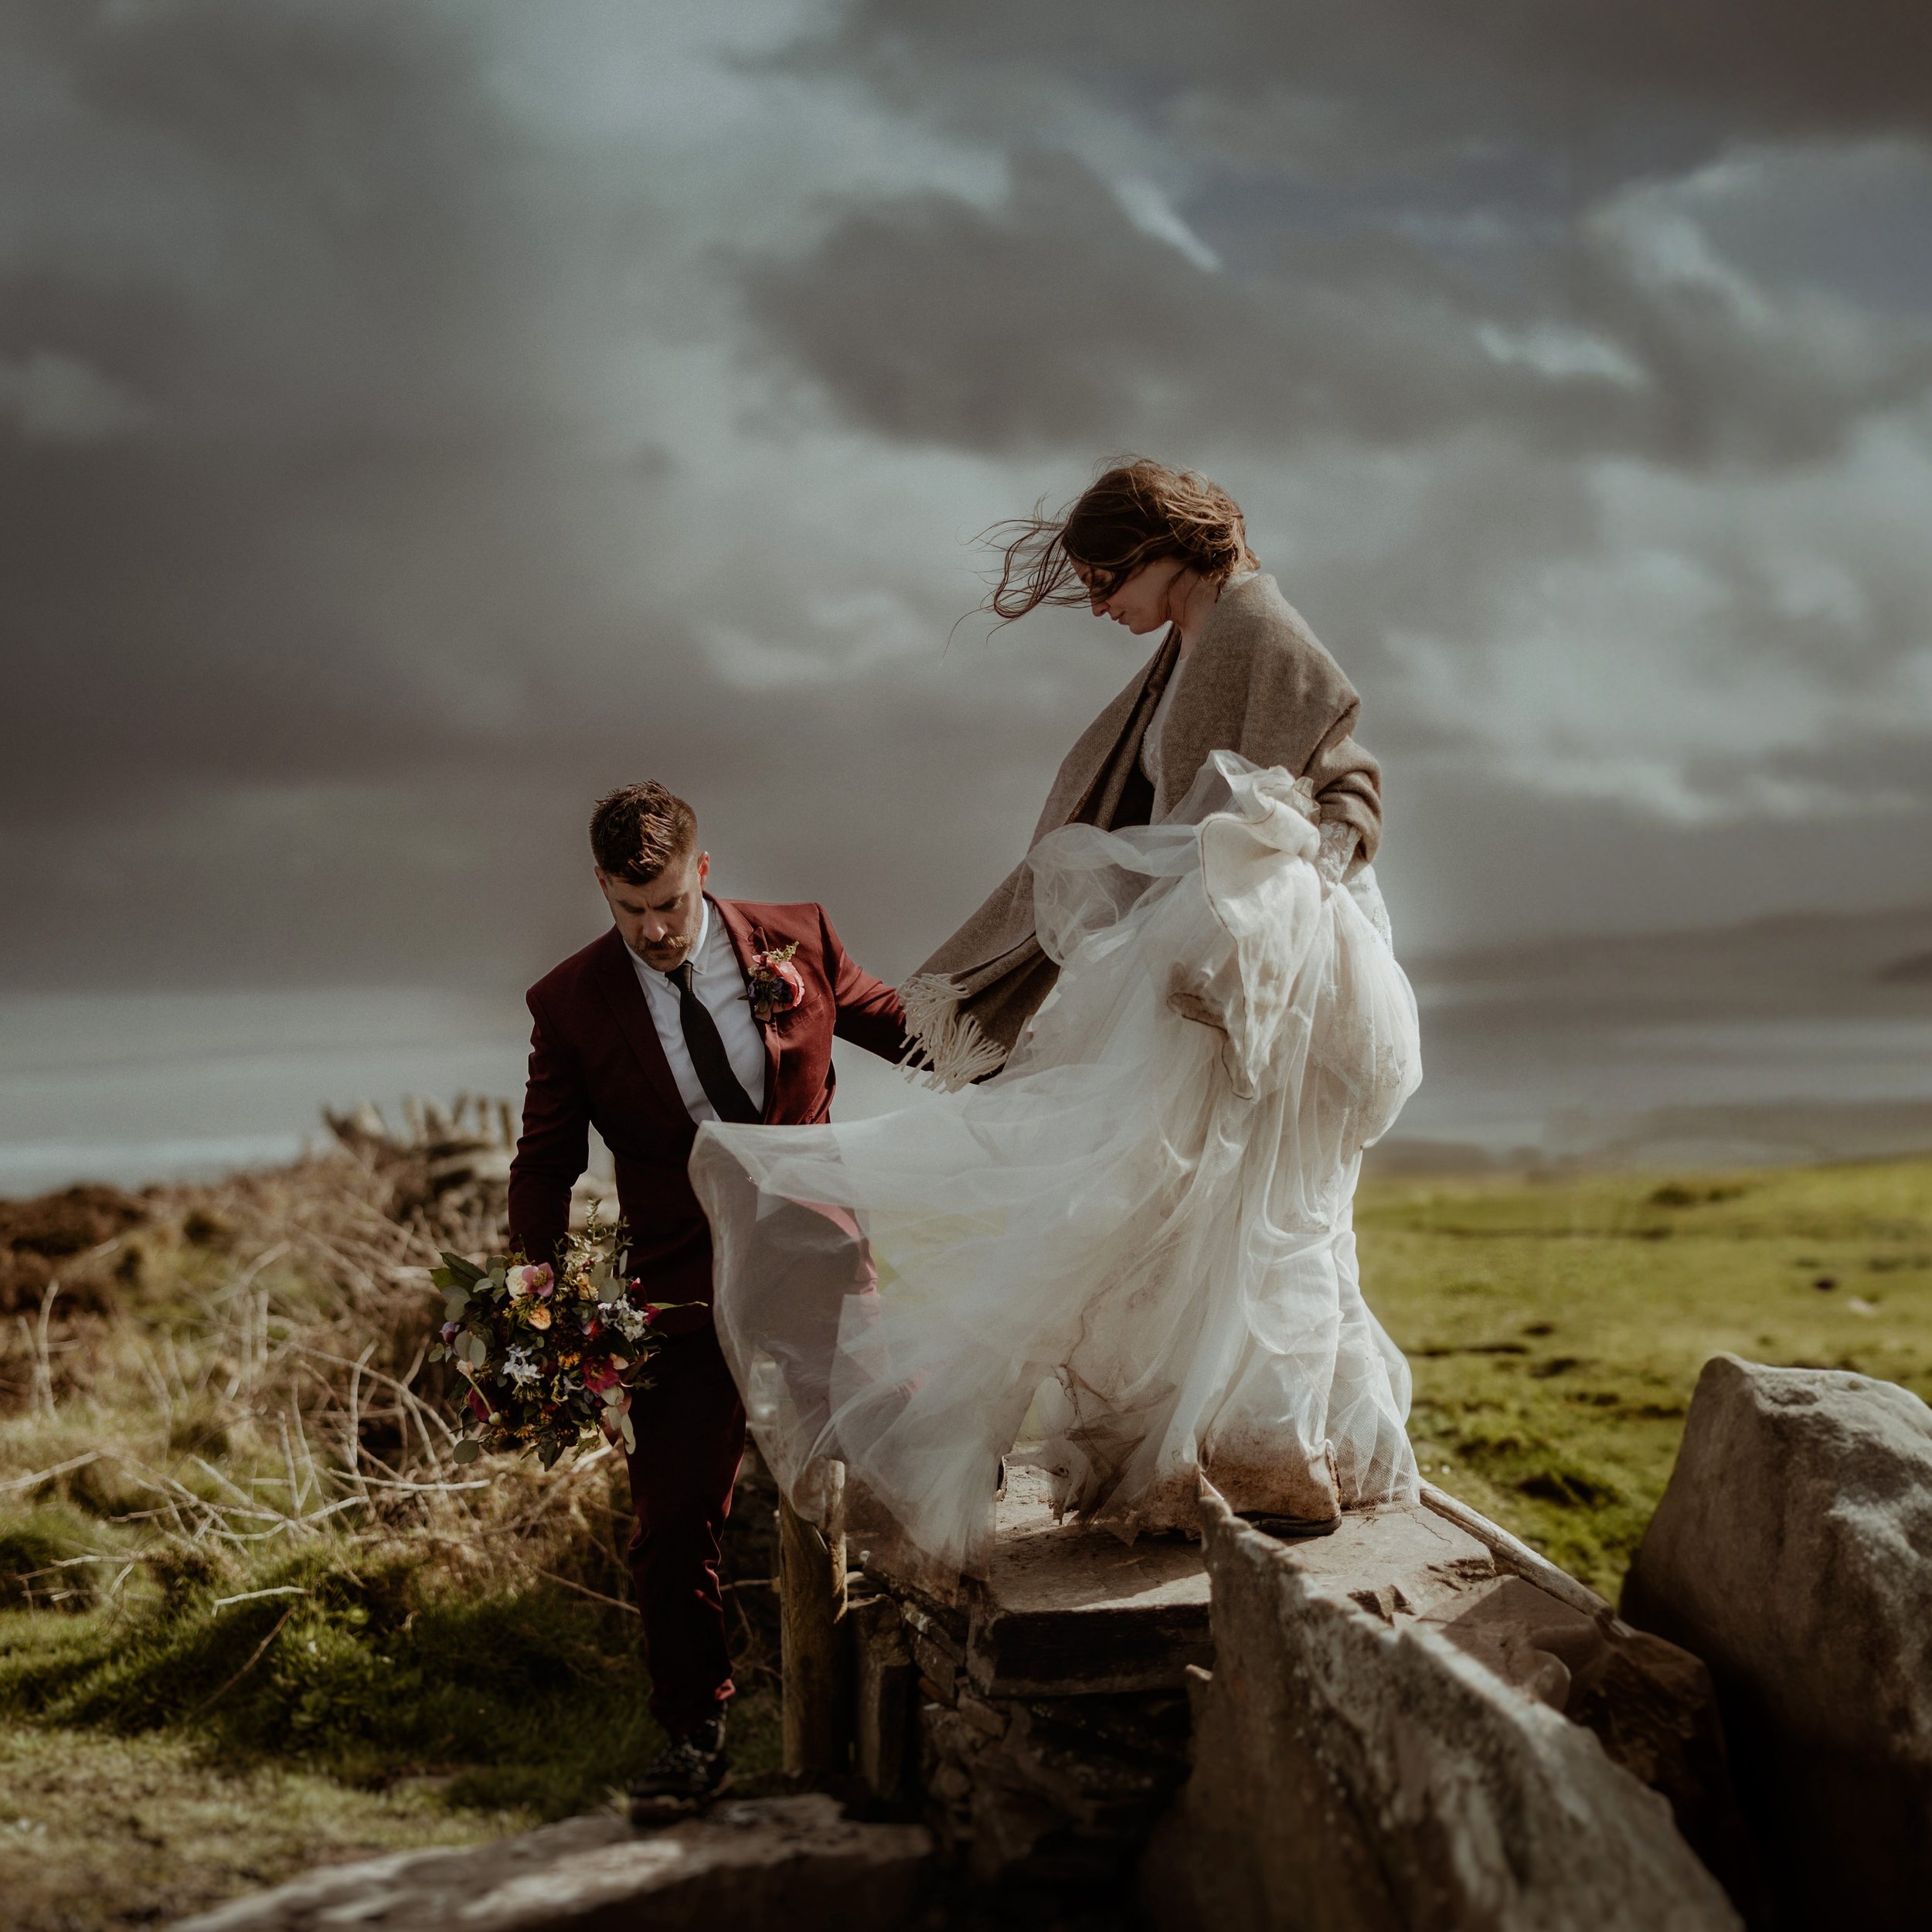 Surrounded by nature, we promise to share our lives together in an exciting journey that joins not just our hands, but our hearts and spirits as well.
.
.
.
.

#IrelandElopementAdventure #WildIrishWedding #ElopeInIreland #IrishLoveStory #EmeraldIsleE